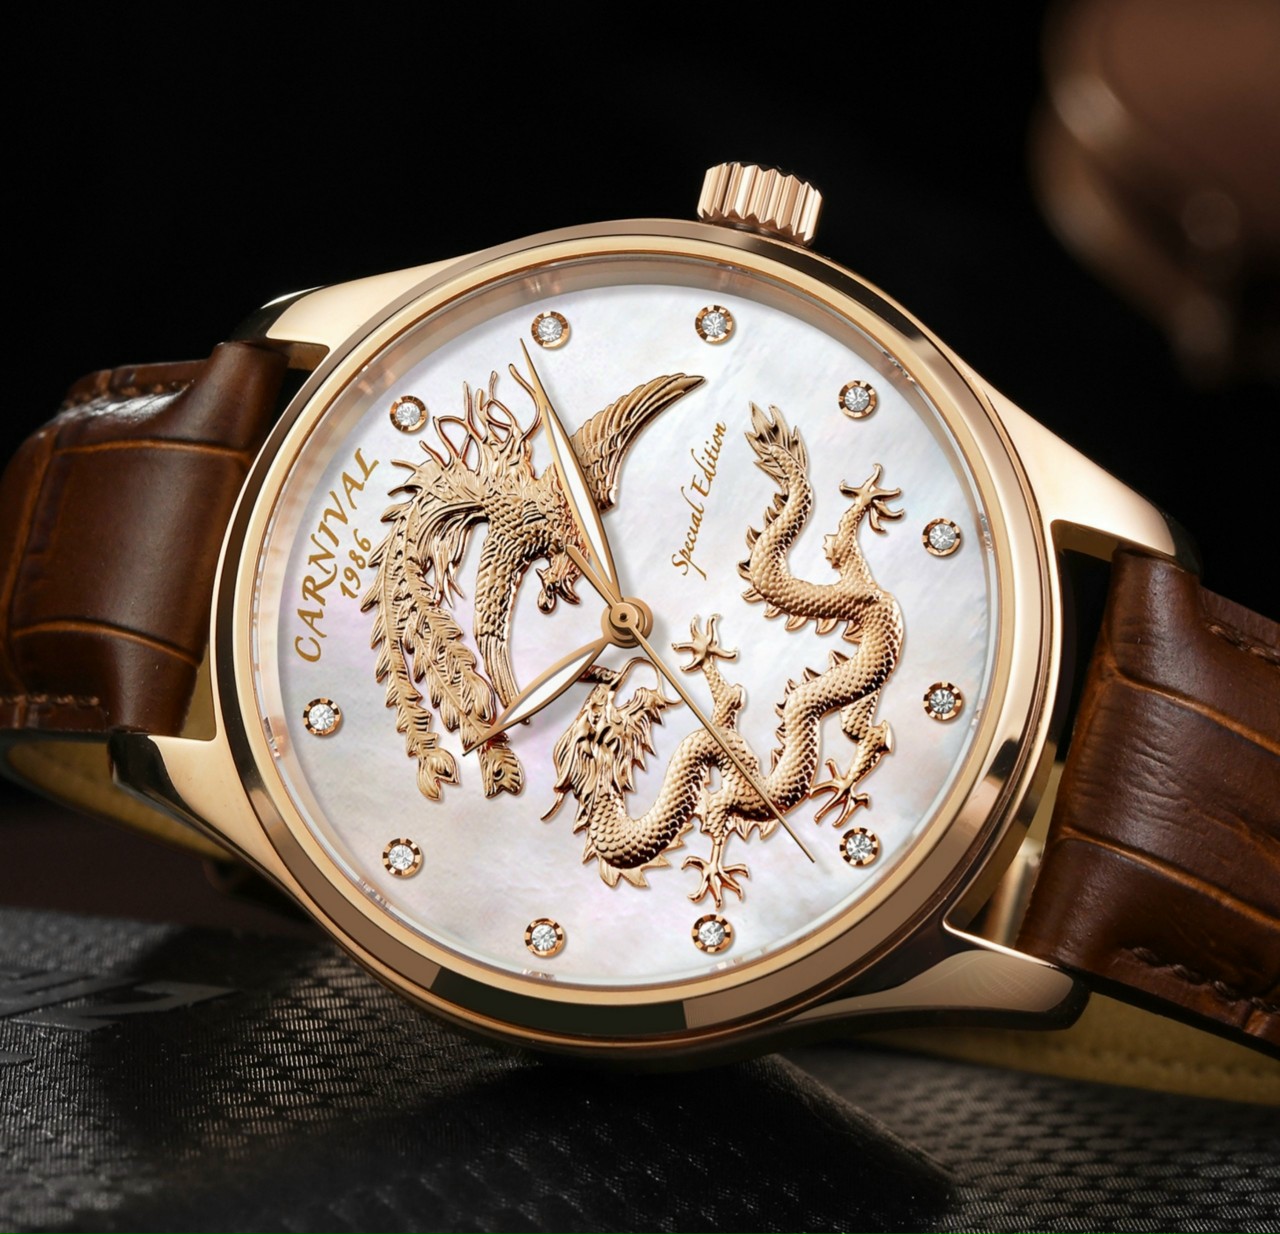 ĐỒNG HỒ CARNIVAL LONG PHỤNG SPECIAL EDITION DIAMOND 9